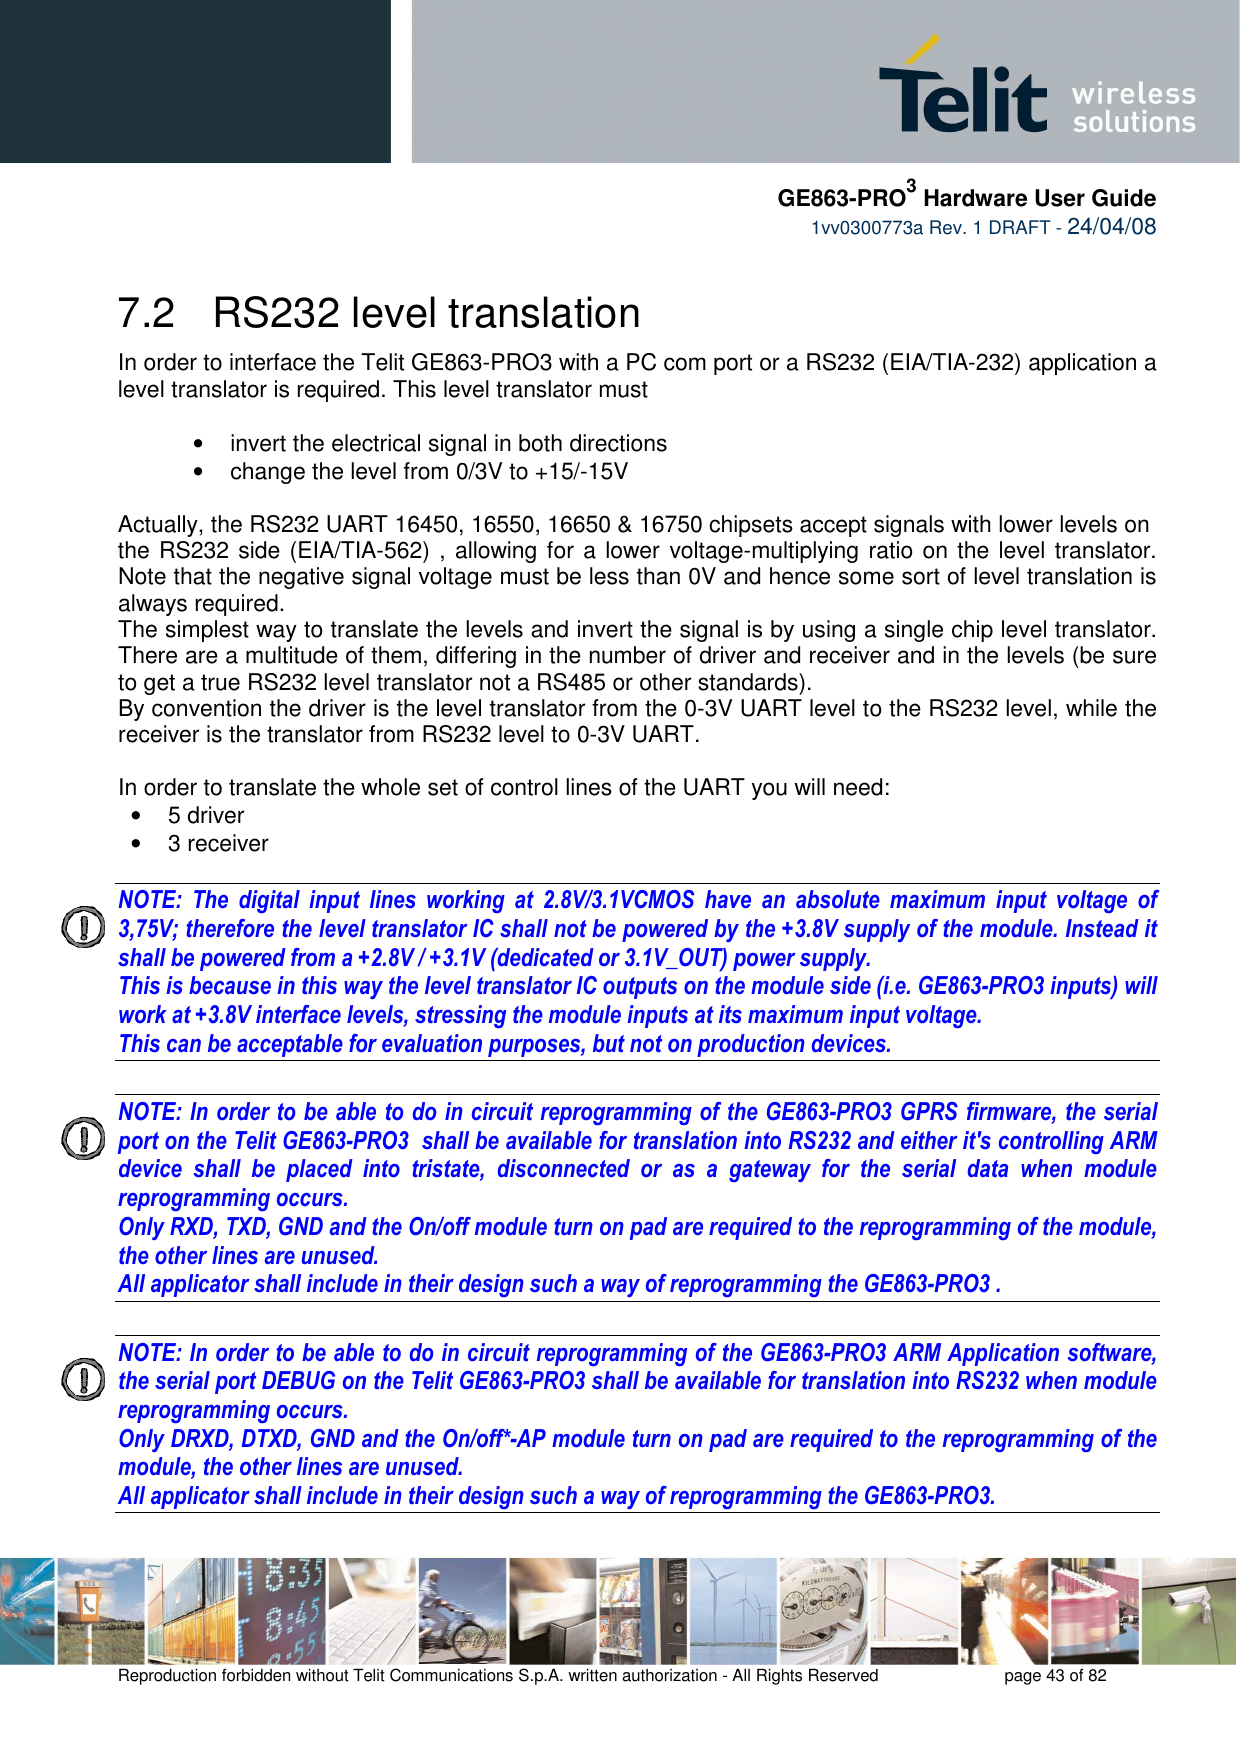     GE863-PRO3 Hardware User Guide  1vv0300773a Rev. 1 DRAFT - 24/04/08    Reproduction forbidden without Telit Communications S.p.A. written authorization - All Rights Reserved    page 43 of 82  7.2   RS232 level translation In order to interface the Telit GE863-PRO3 with a PC com port or a RS232 (EIA/TIA-232) application a level translator is required. This level translator must  •  invert the electrical signal in both directions •  change the level from 0/3V to +15/-15V   Actually, the RS232 UART 16450, 16550, 16650 &amp; 16750 chipsets accept signals with lower levels on  the RS232 side (EIA/TIA-562) , allowing for a lower voltage-multiplying ratio on the level translator. Note that the negative signal voltage must be less than 0V and hence some sort of level translation is always required.  The simplest way to translate the levels and invert the signal is by using a single chip level translator. There are a multitude of them, differing in the number of driver and receiver and in the levels (be sure to get a true RS232 level translator not a RS485 or other standards). By convention the driver is the level translator from the 0-3V UART level to the RS232 level, while the receiver is the translator from RS232 level to 0-3V UART.  In order to translate the whole set of control lines of the UART you will need: •  5 driver •  3 receiver  NOTE:  The  digital  input  lines  working  at  2.8V/3.1VCMOS  have  an  absolute  maximum  input  voltage  of 3,75V; therefore the level translator IC shall not be powered by the +3.8V supply of the module. Instead it shall be powered from a +2.8V / +3.1V (dedicated or 3.1V_OUT) power supply. This is because in this way the level translator IC outputs on the module side (i.e. GE863-PRO3 inputs) will work at +3.8V interface levels, stressing the module inputs at its maximum input voltage. This can be acceptable for evaluation purposes, but not on production devices.  NOTE: In order to be able to do in circuit reprogramming of the GE863-PRO3 GPRS firmware, the serial port on the Telit GE863-PRO3  shall be available for translation into RS232 and either it&apos;s controlling ARM device  shall  be  placed  into  tristate,  disconnected  or  as  a  gateway  for  the  serial  data  when  module reprogramming occurs. Only RXD, TXD, GND and the On/off module turn on pad are required to the reprogramming of the module, the other lines are unused. All applicator shall include in their design such a way of reprogramming the GE863-PRO3 .   NOTE: In order to be able to do in circuit reprogramming of the GE863-PRO3 ARM Application software, the serial port DEBUG on the Telit GE863-PRO3 shall be available for translation into RS232 when module reprogramming occurs. Only DRXD, DTXD, GND and the On/off*-AP module turn on pad are required to the reprogramming of the module, the other lines are unused. All applicator shall include in their design such a way of reprogramming the GE863-PRO3.   